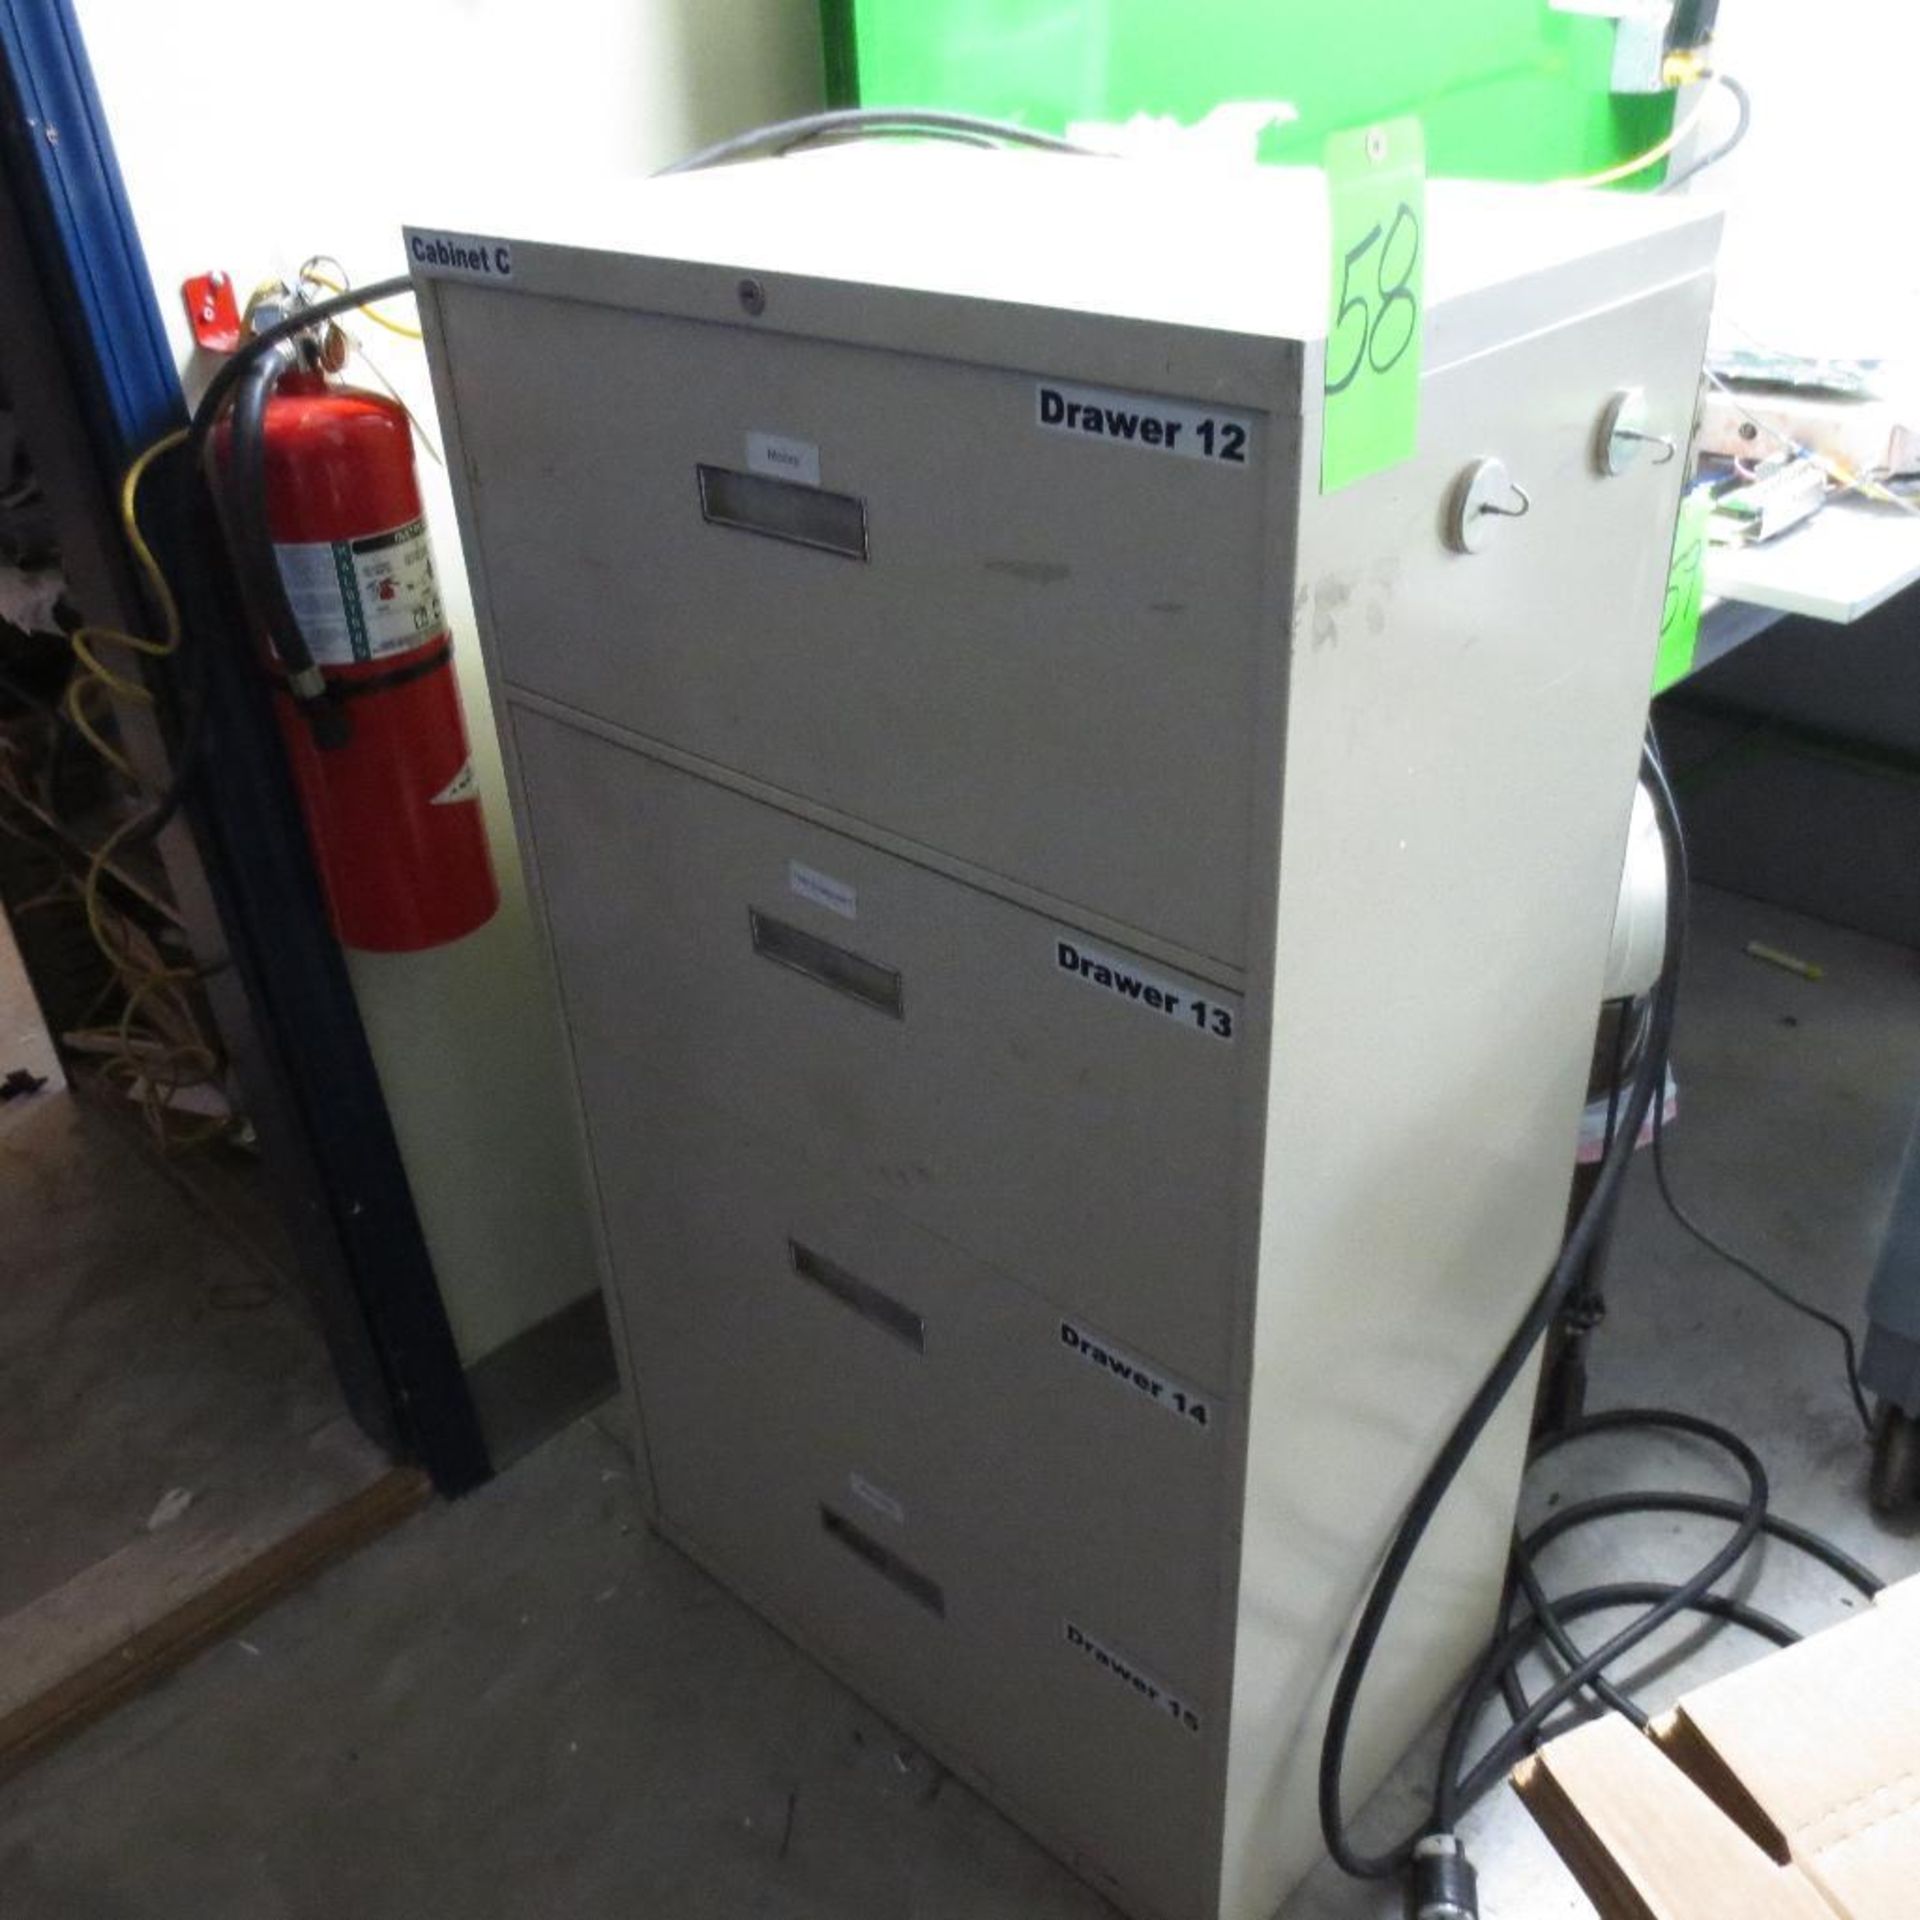 File Cabinet ( No Contents ) ; located at 556 Leffingwell Ave Kirkwood, MO 63122